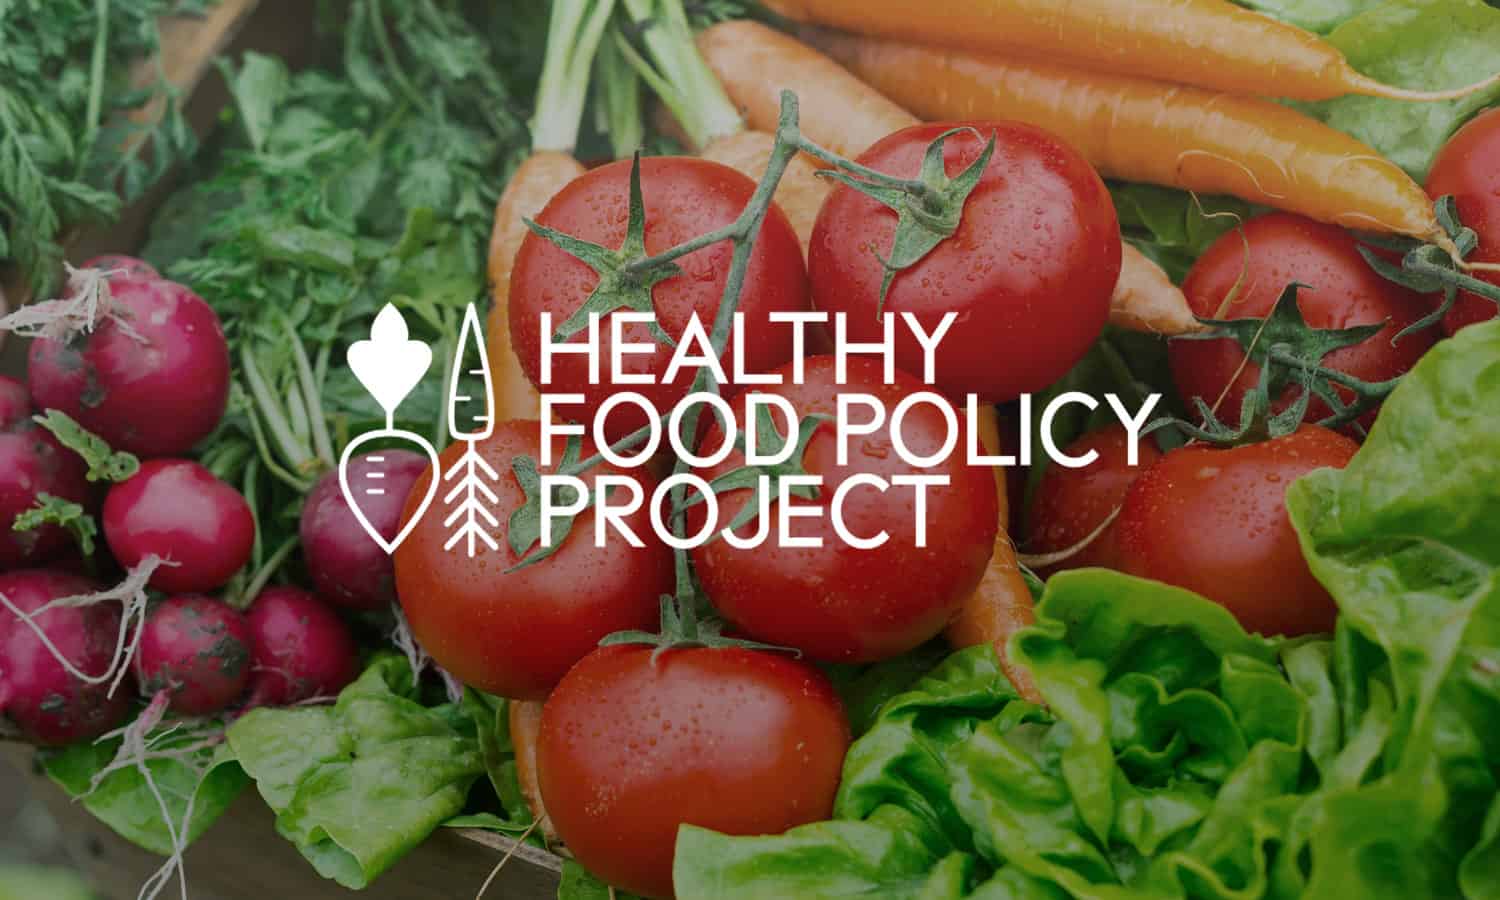 A team of leading food lawyers and legal scholars in the United States is launching the Healthy Food Policy Project to support local food policy advocates.